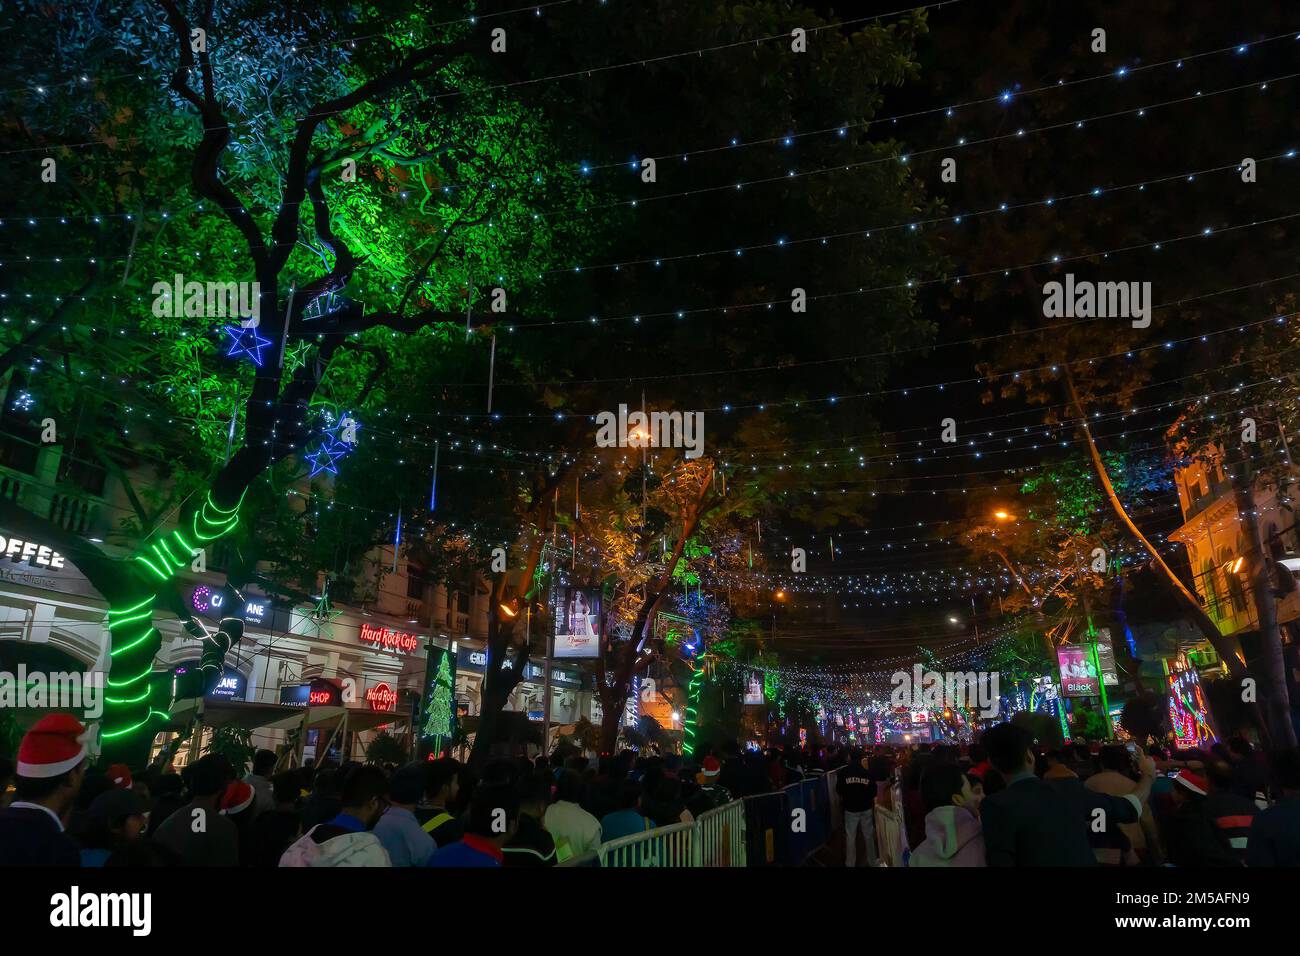 Kolkata, West Bengal, India - 25.12.2018 : Christmas celebration by enthusiastic young public at illuminated and decorated park street with lights. Stock Photo